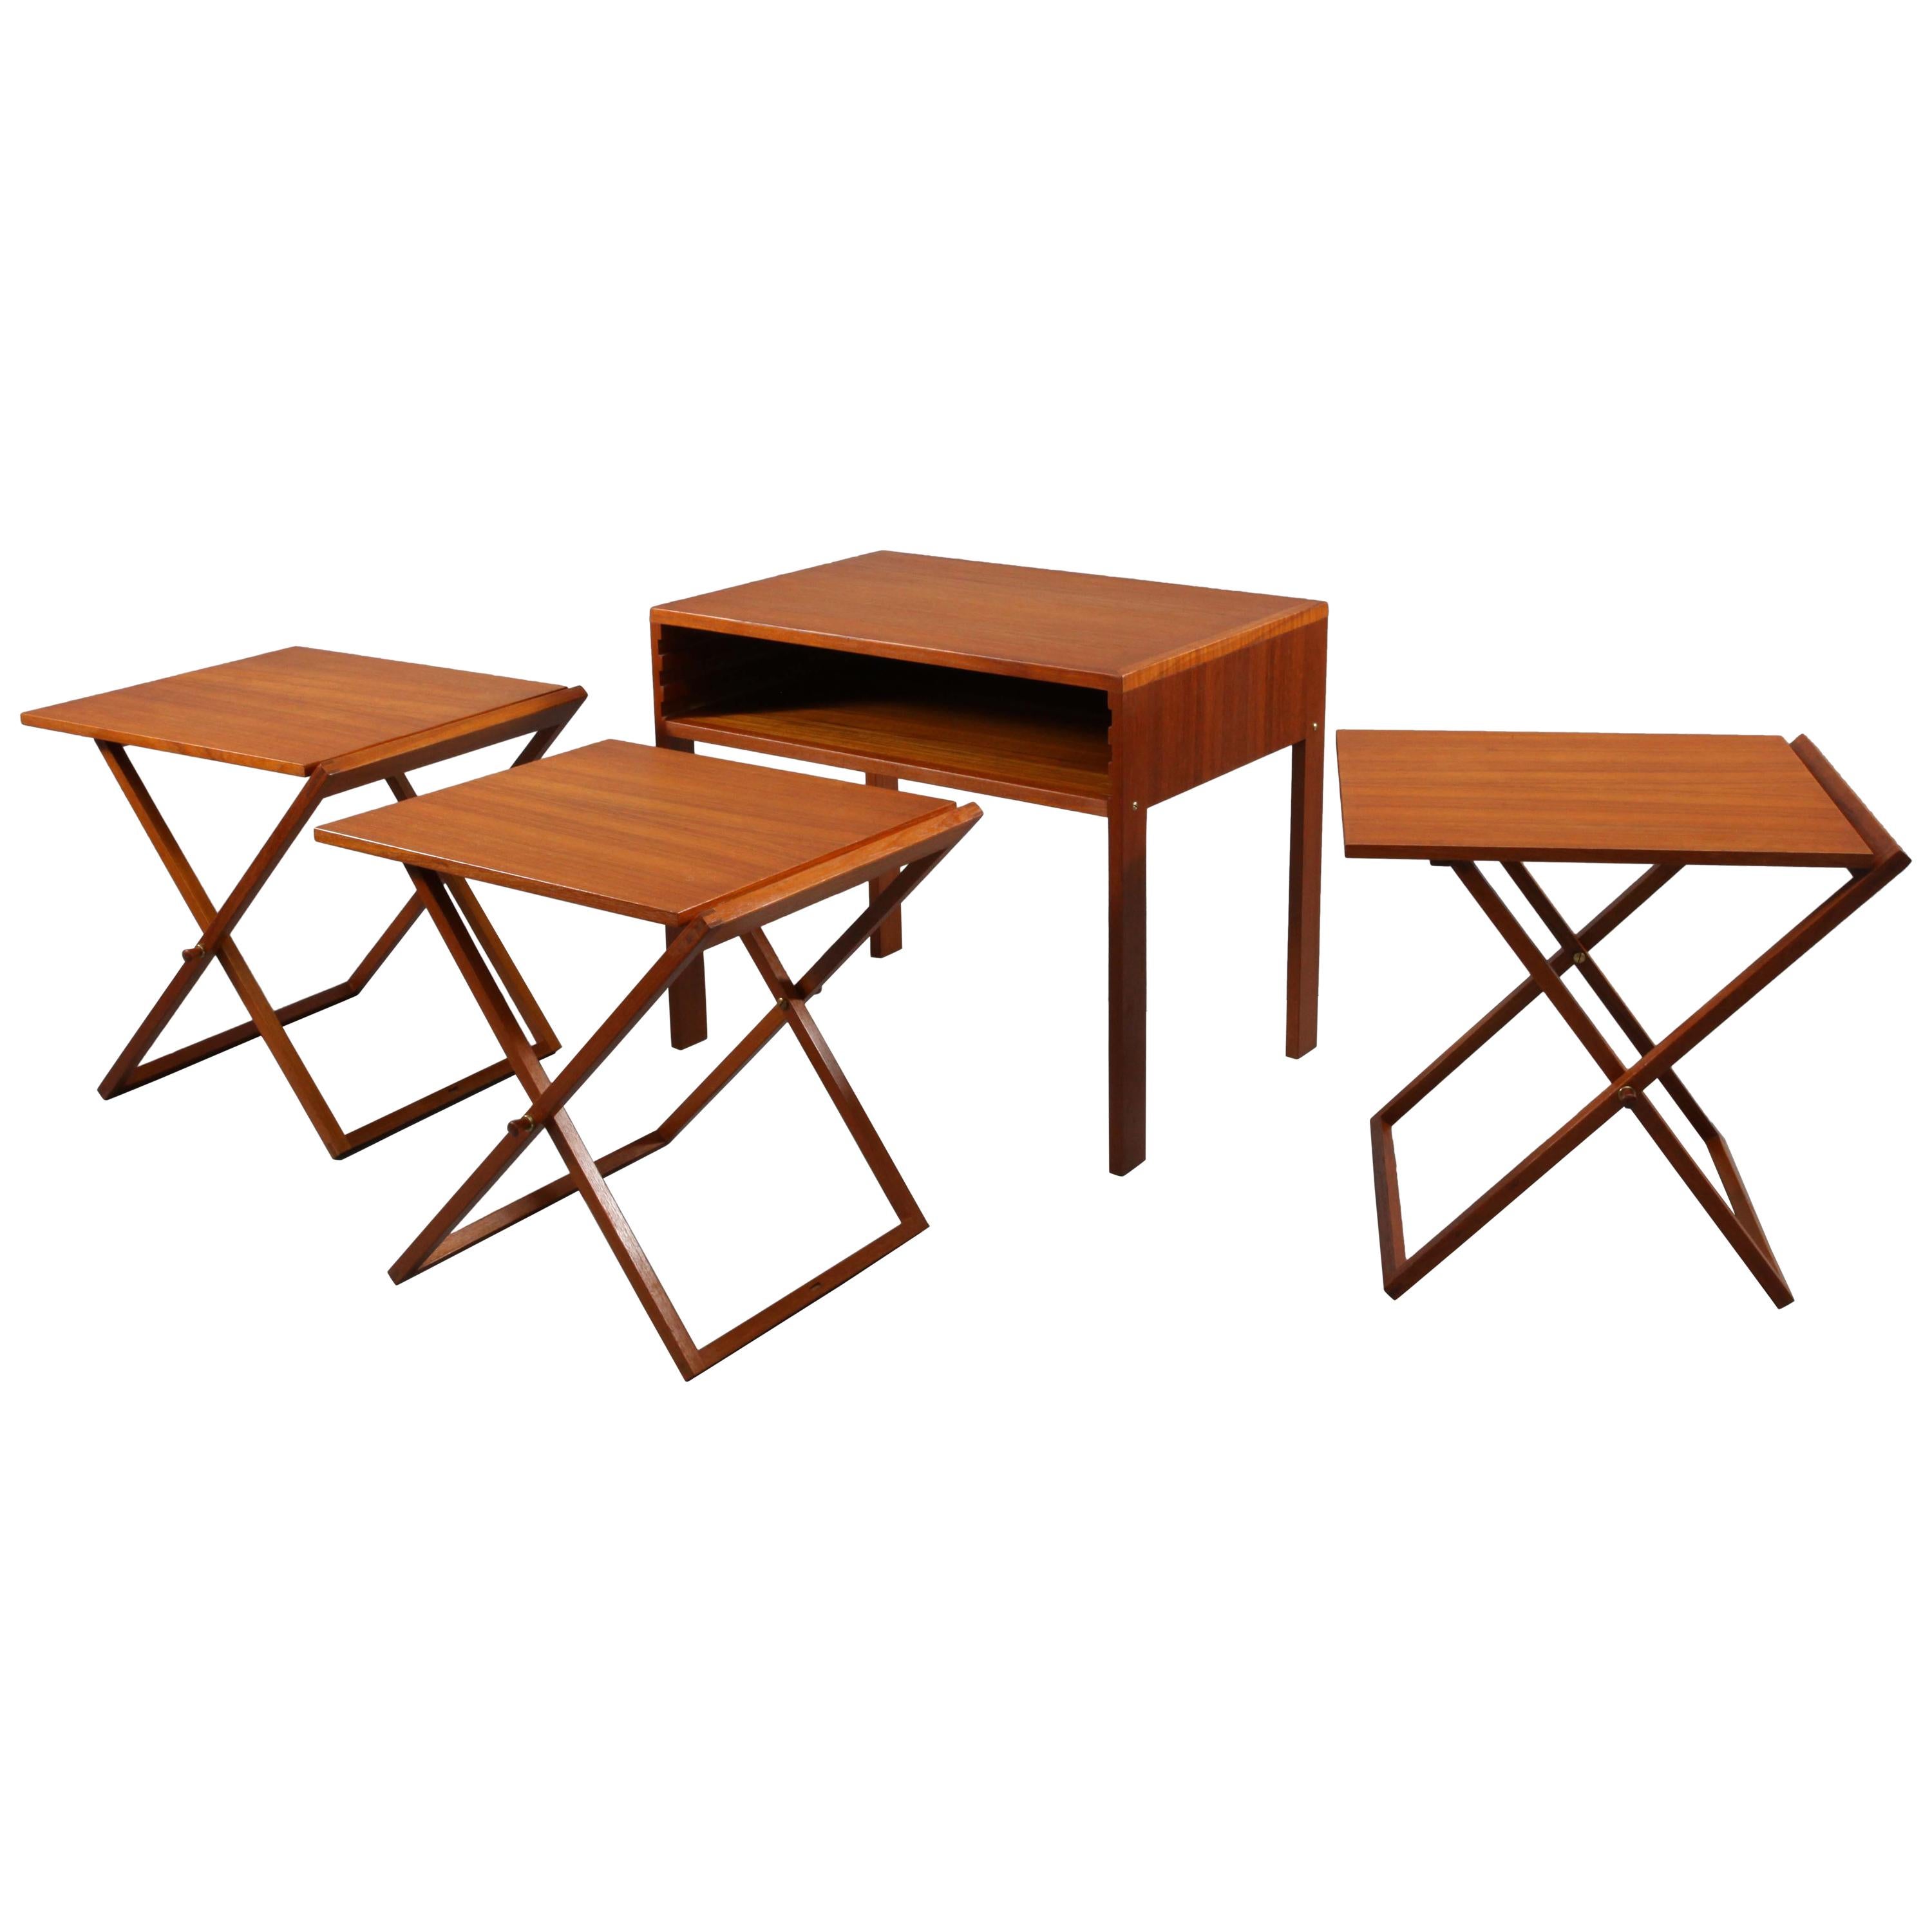 Set of Three Teakwood Folding Tables Stored in End Table by Illum Wikkelsø